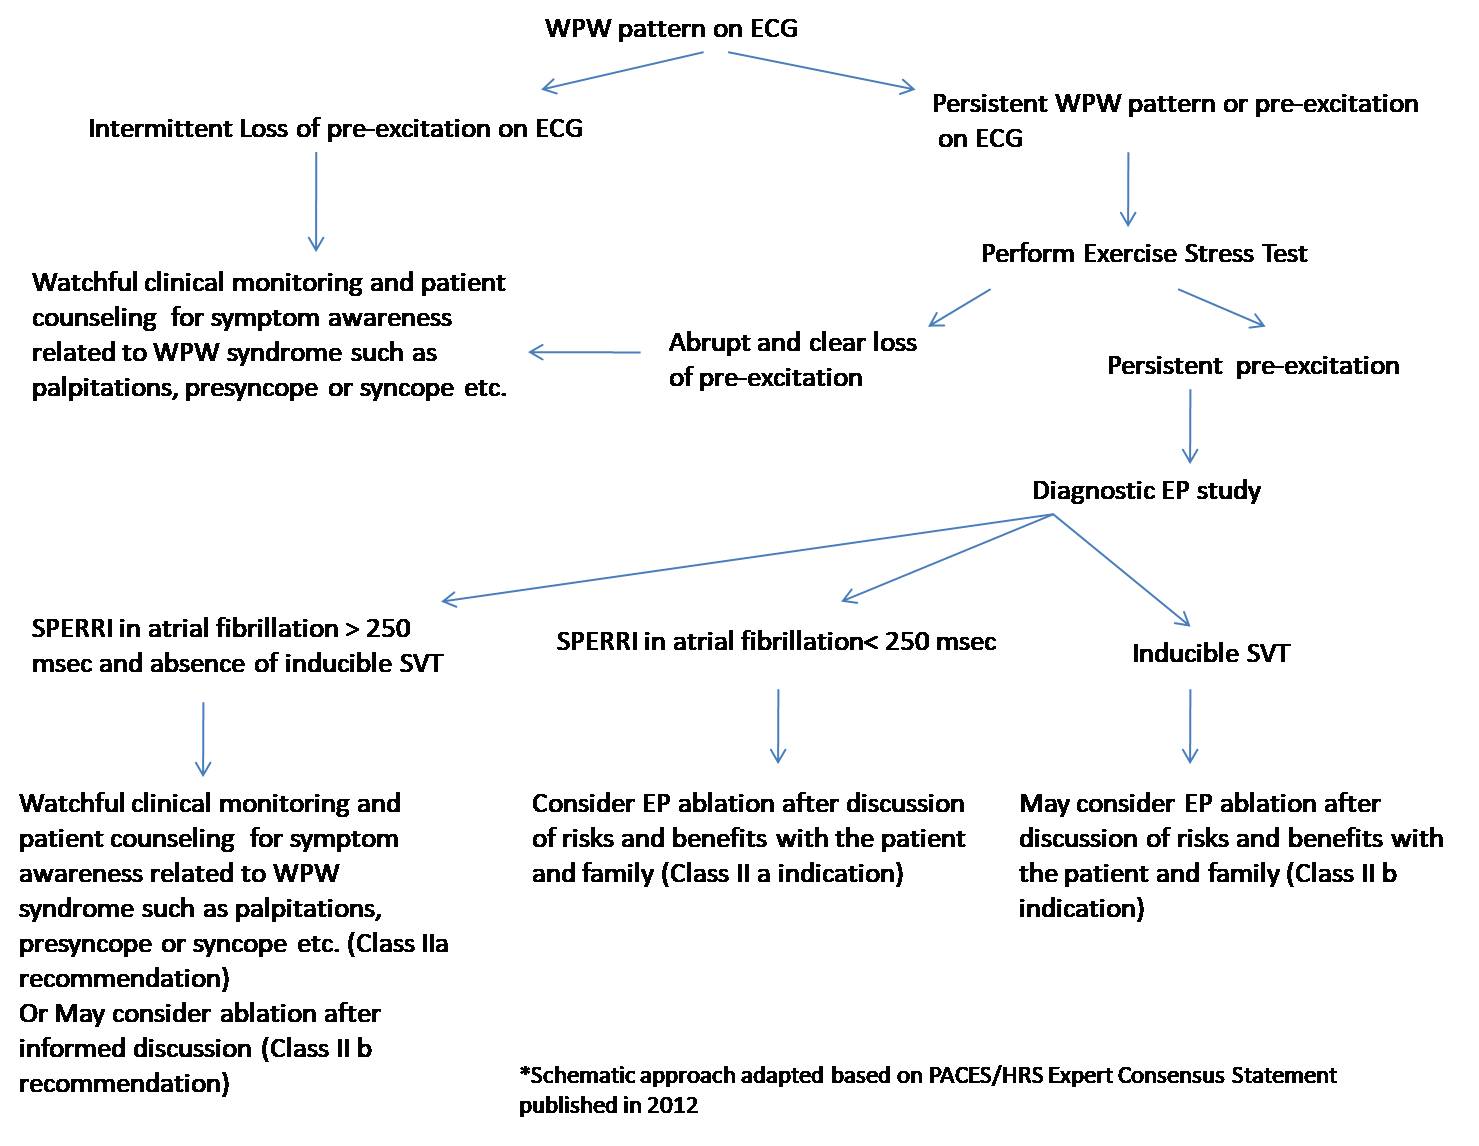 Risk stratification of asymptomatic patients with WPW